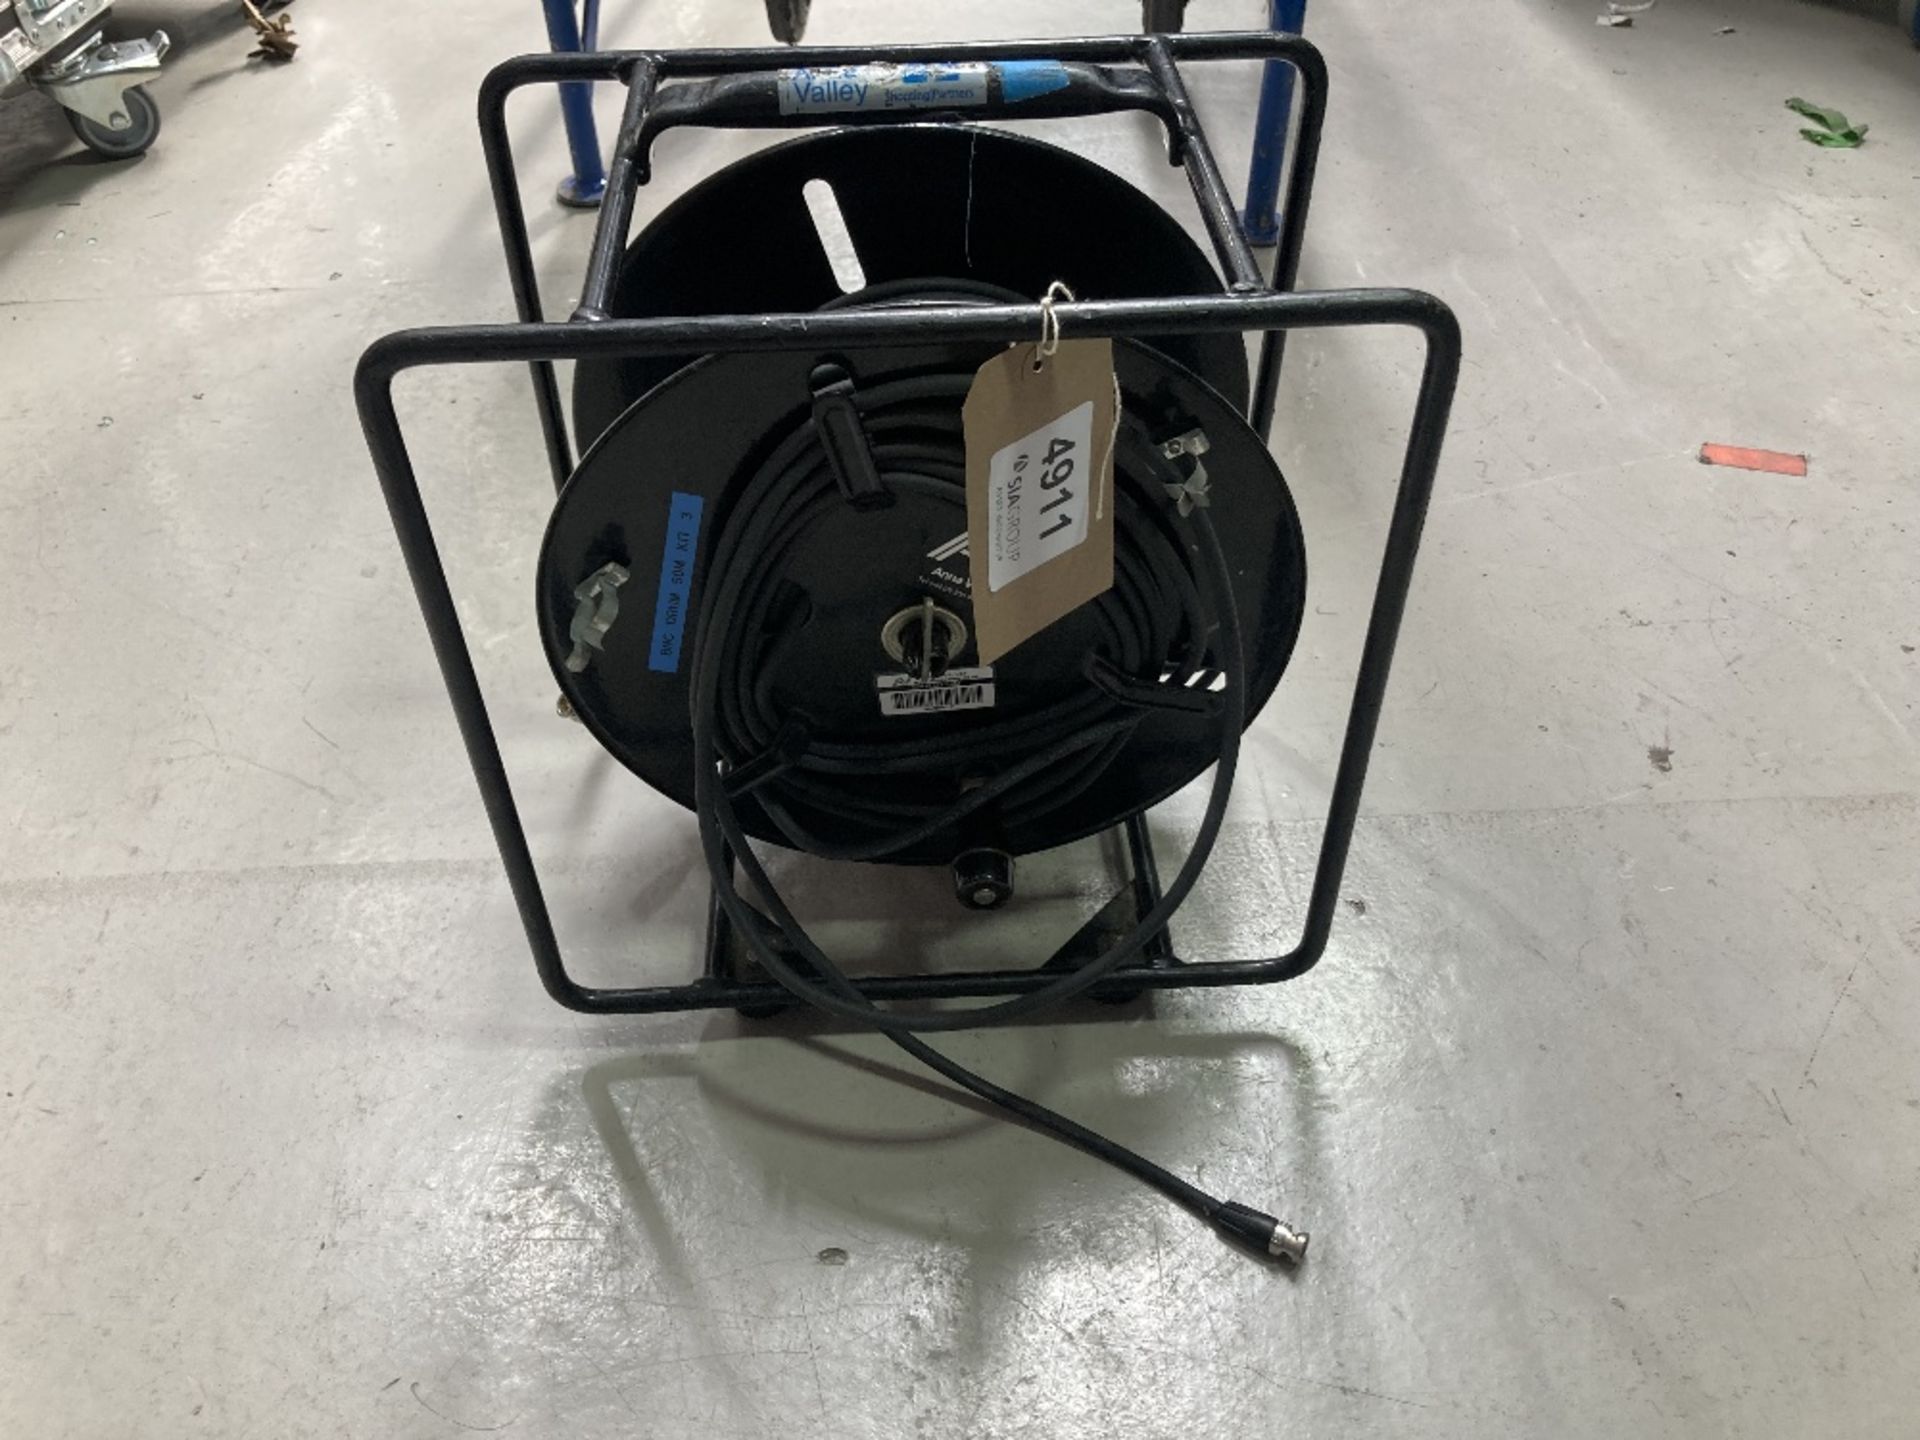 50m BNC Cable Reel